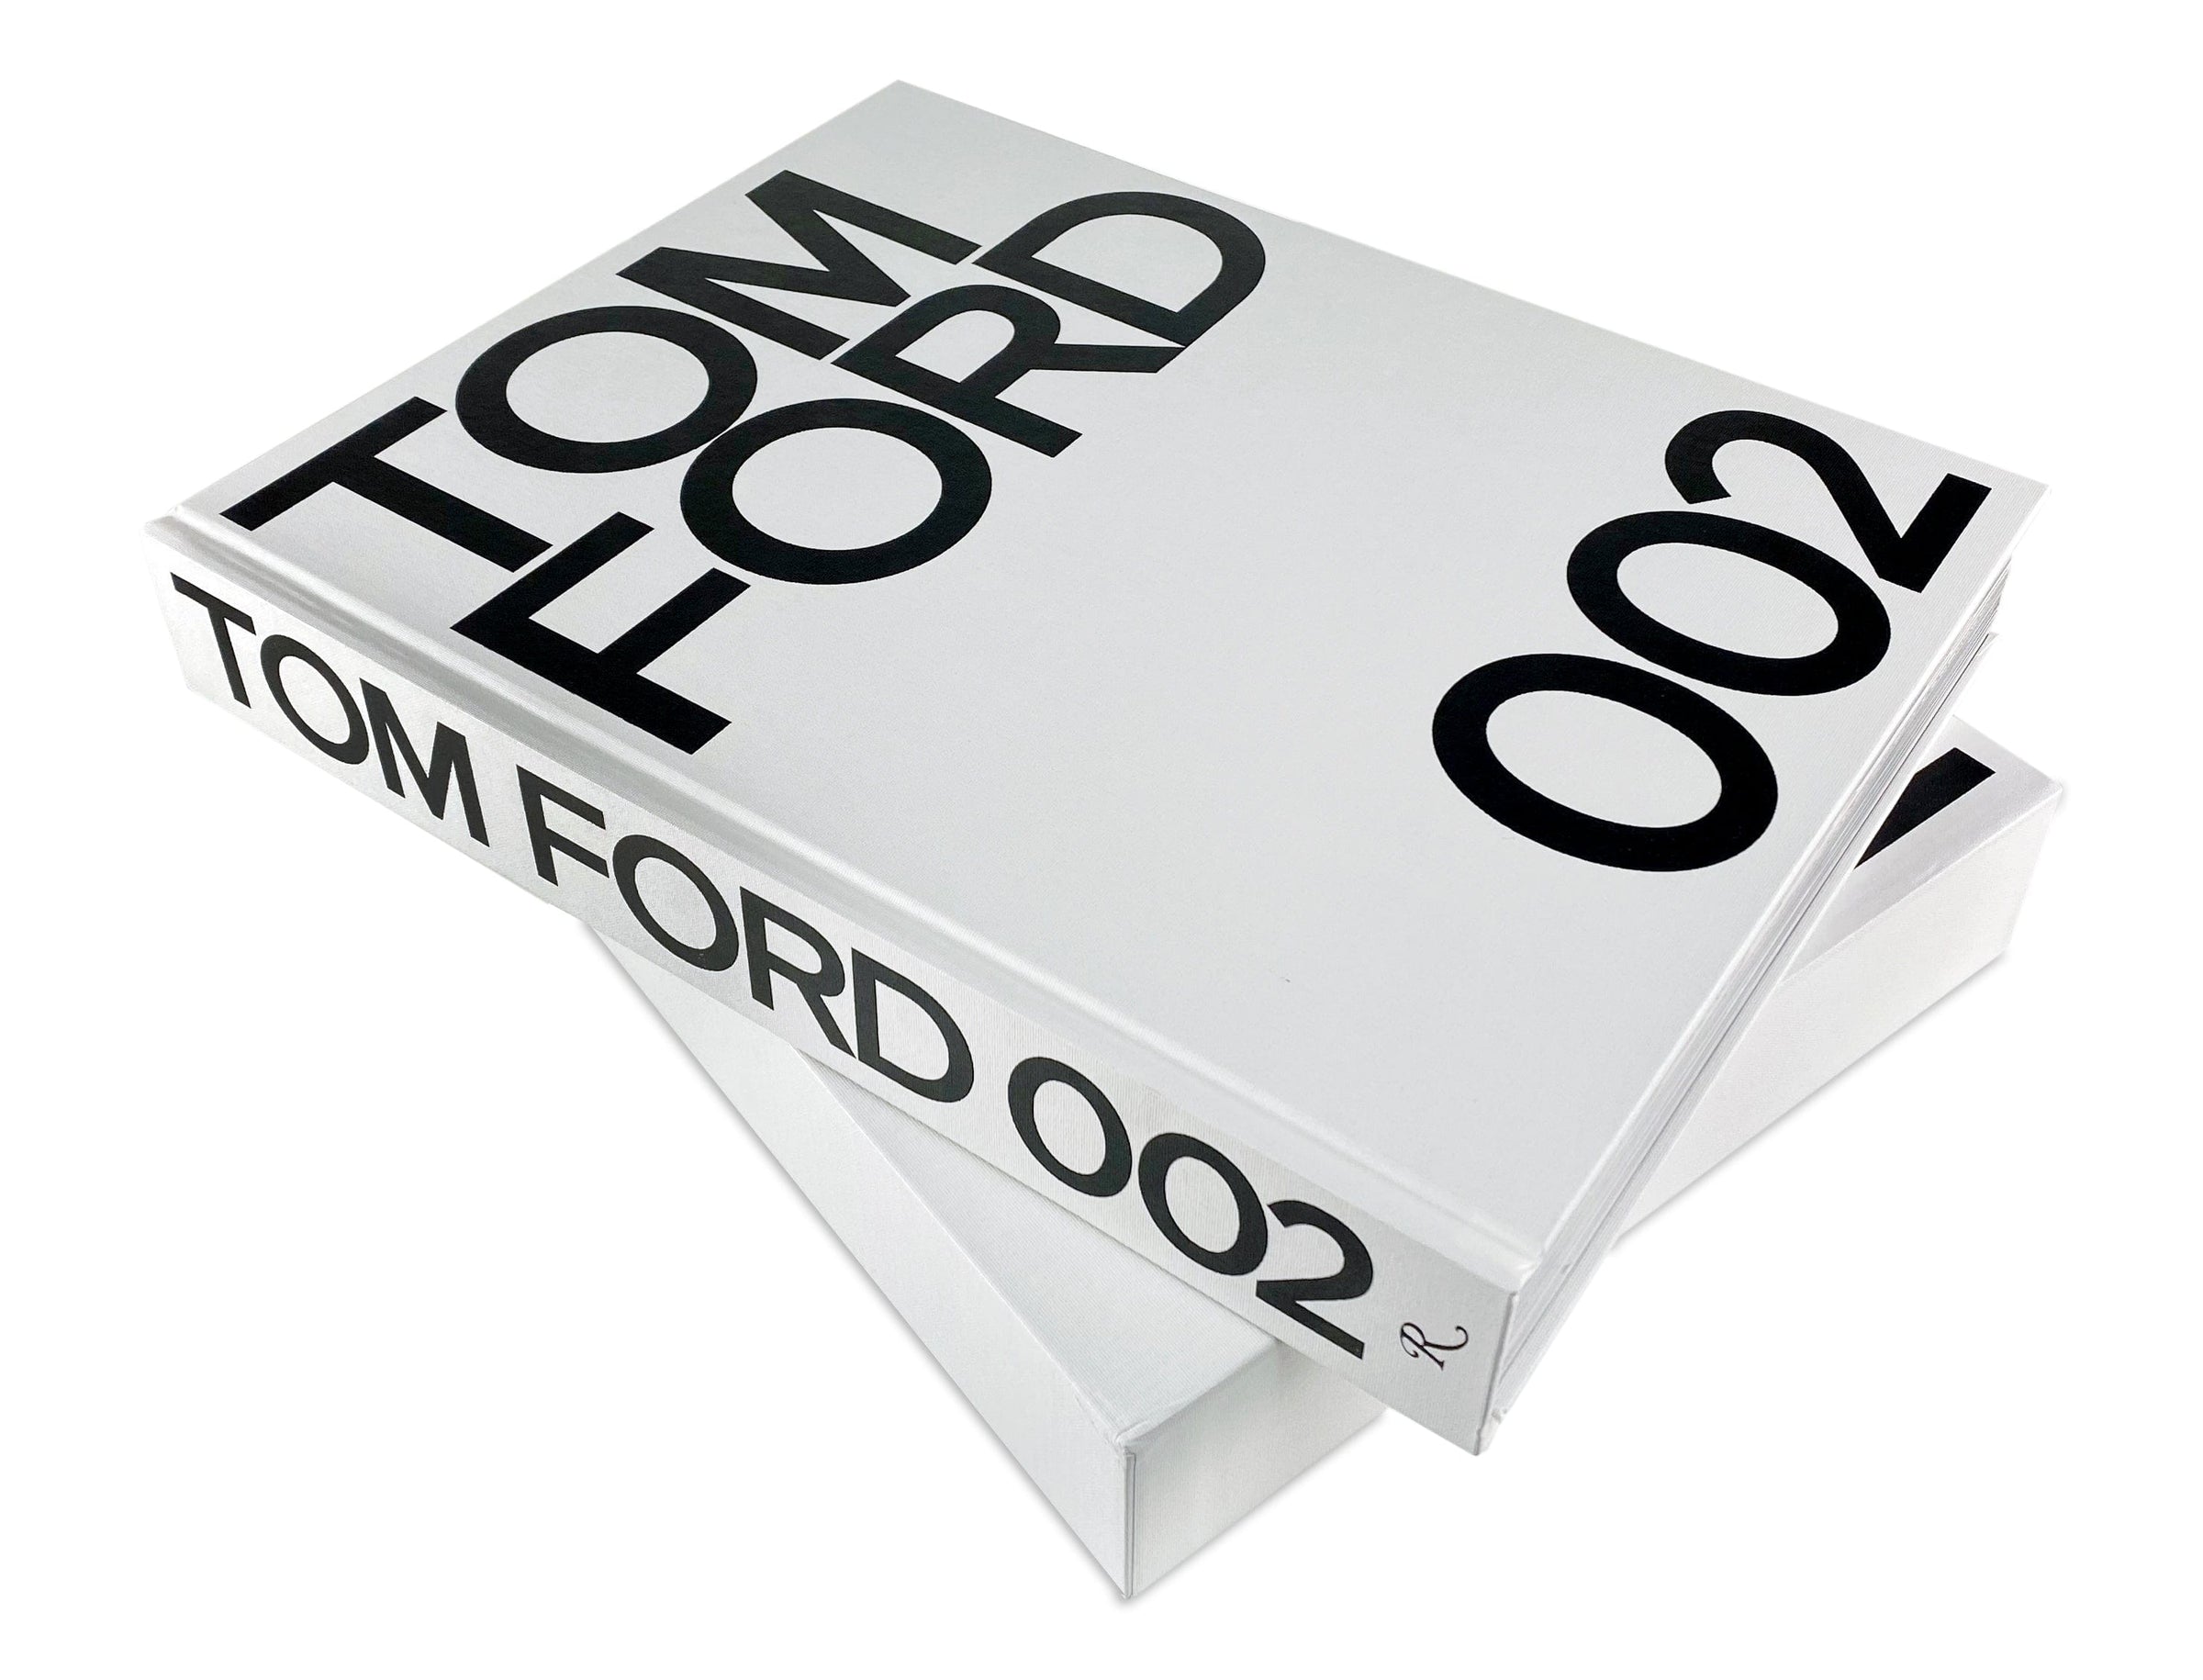 Harper Entertainment Distribution Services Fashion Tom Ford 002 by Tom Ford (7715480436985)